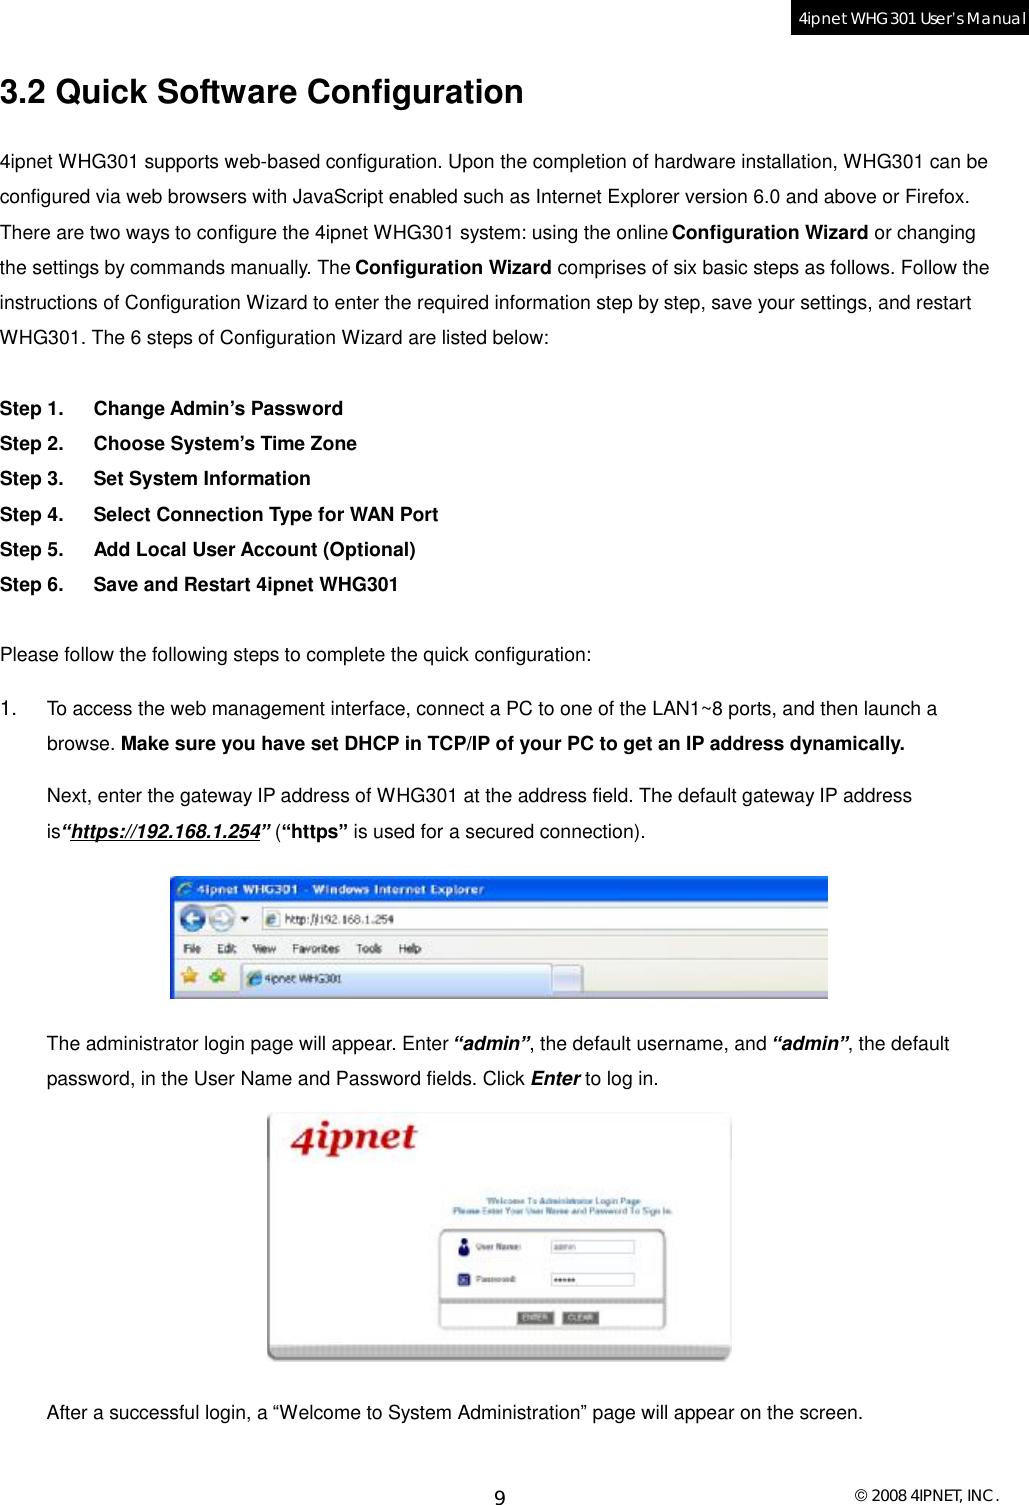  © 2008 4IPNET, INC. 9 4ipnet WHG301 User’s Manual  3.2 Quick Software Configuration 4ipnet WHG301 supports web-based configuration. Upon the completion of hardware installation, WHG301 can be configured via web browsers with JavaScript enabled such as Internet Explorer version 6.0 and above or Firefox. There are two ways to configure the 4ipnet WHG301 system: using the online Configuration Wizard or changing the settings by commands manually. The Configuration Wizard comprises of six basic steps as follows. Follow the instructions of Configuration Wizard to enter the required information step by step, save your settings, and restart WHG301. The 6 steps of Configuration Wizard are listed below:   Step 1. Change Admin’s Password Step 2. Choose System’s Time Zone Step 3. Set System Information Step 4. Select Connection Type for WAN Port Step 5. Add Local User Account (Optional) Step 6. Save and Restart 4ipnet WHG301  Please follow the following steps to complete the quick configuration: 1.  To access the web management interface, connect a PC to one of the LAN1~8 ports, and then launch a browse. Make sure you have set DHCP in TCP/IP of your PC to get an IP address dynamically.  Next, enter the gateway IP address of WHG301 at the address field. The default gateway IP address is“https://192.168.1.254” (“https” is used for a secured connection).  The administrator login page will appear. Enter “admin”, the default username, and “admin”, the default password, in the User Name and Password fields. Click Enter to log in.  After a successful login, a “Welcome to System Administration” page will appear on the screen.  